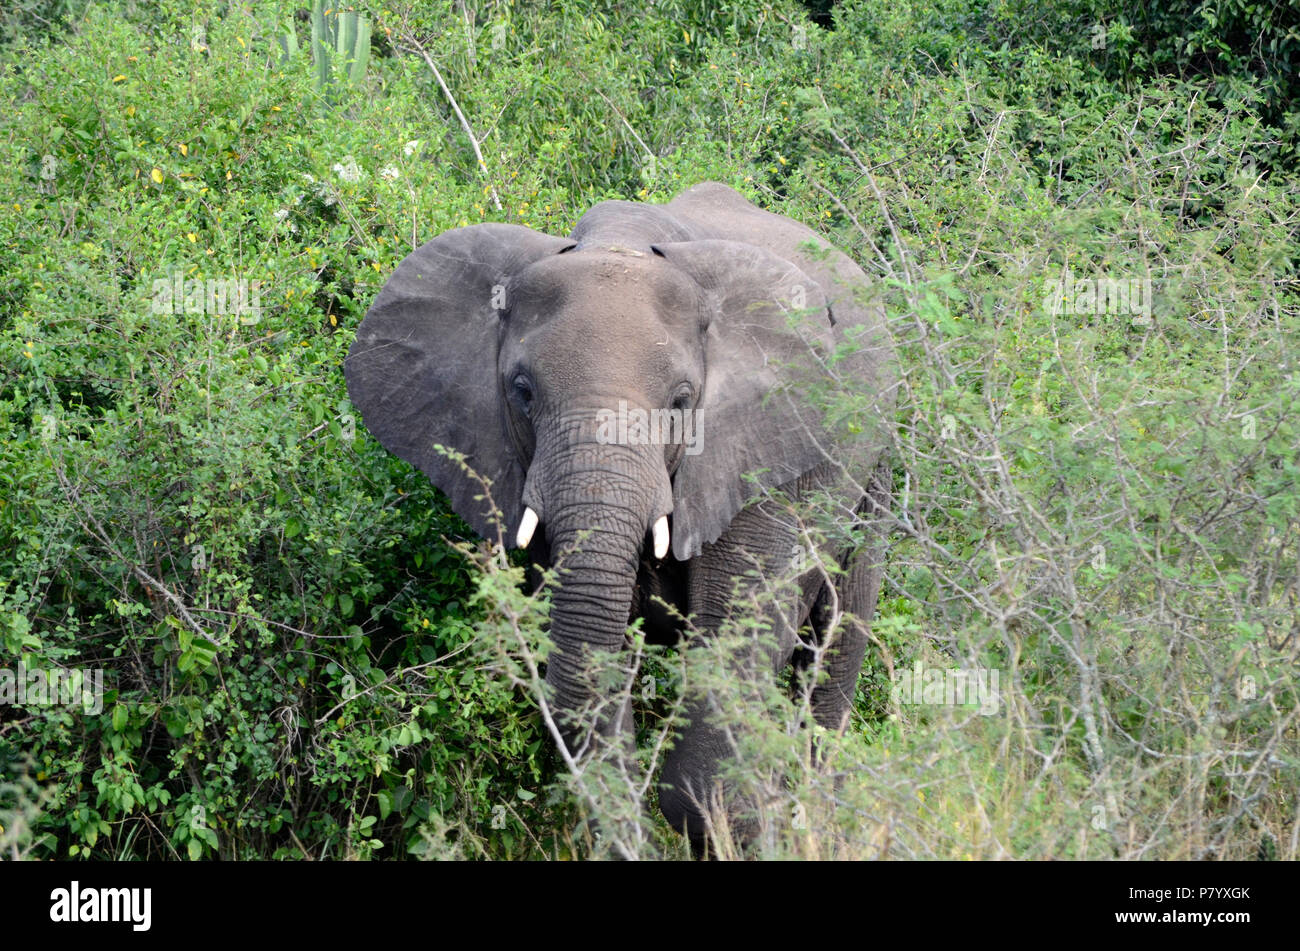 Young elephant walking face on in Queen Elizabeth National Park, Uganda, East Africa Stock Photo